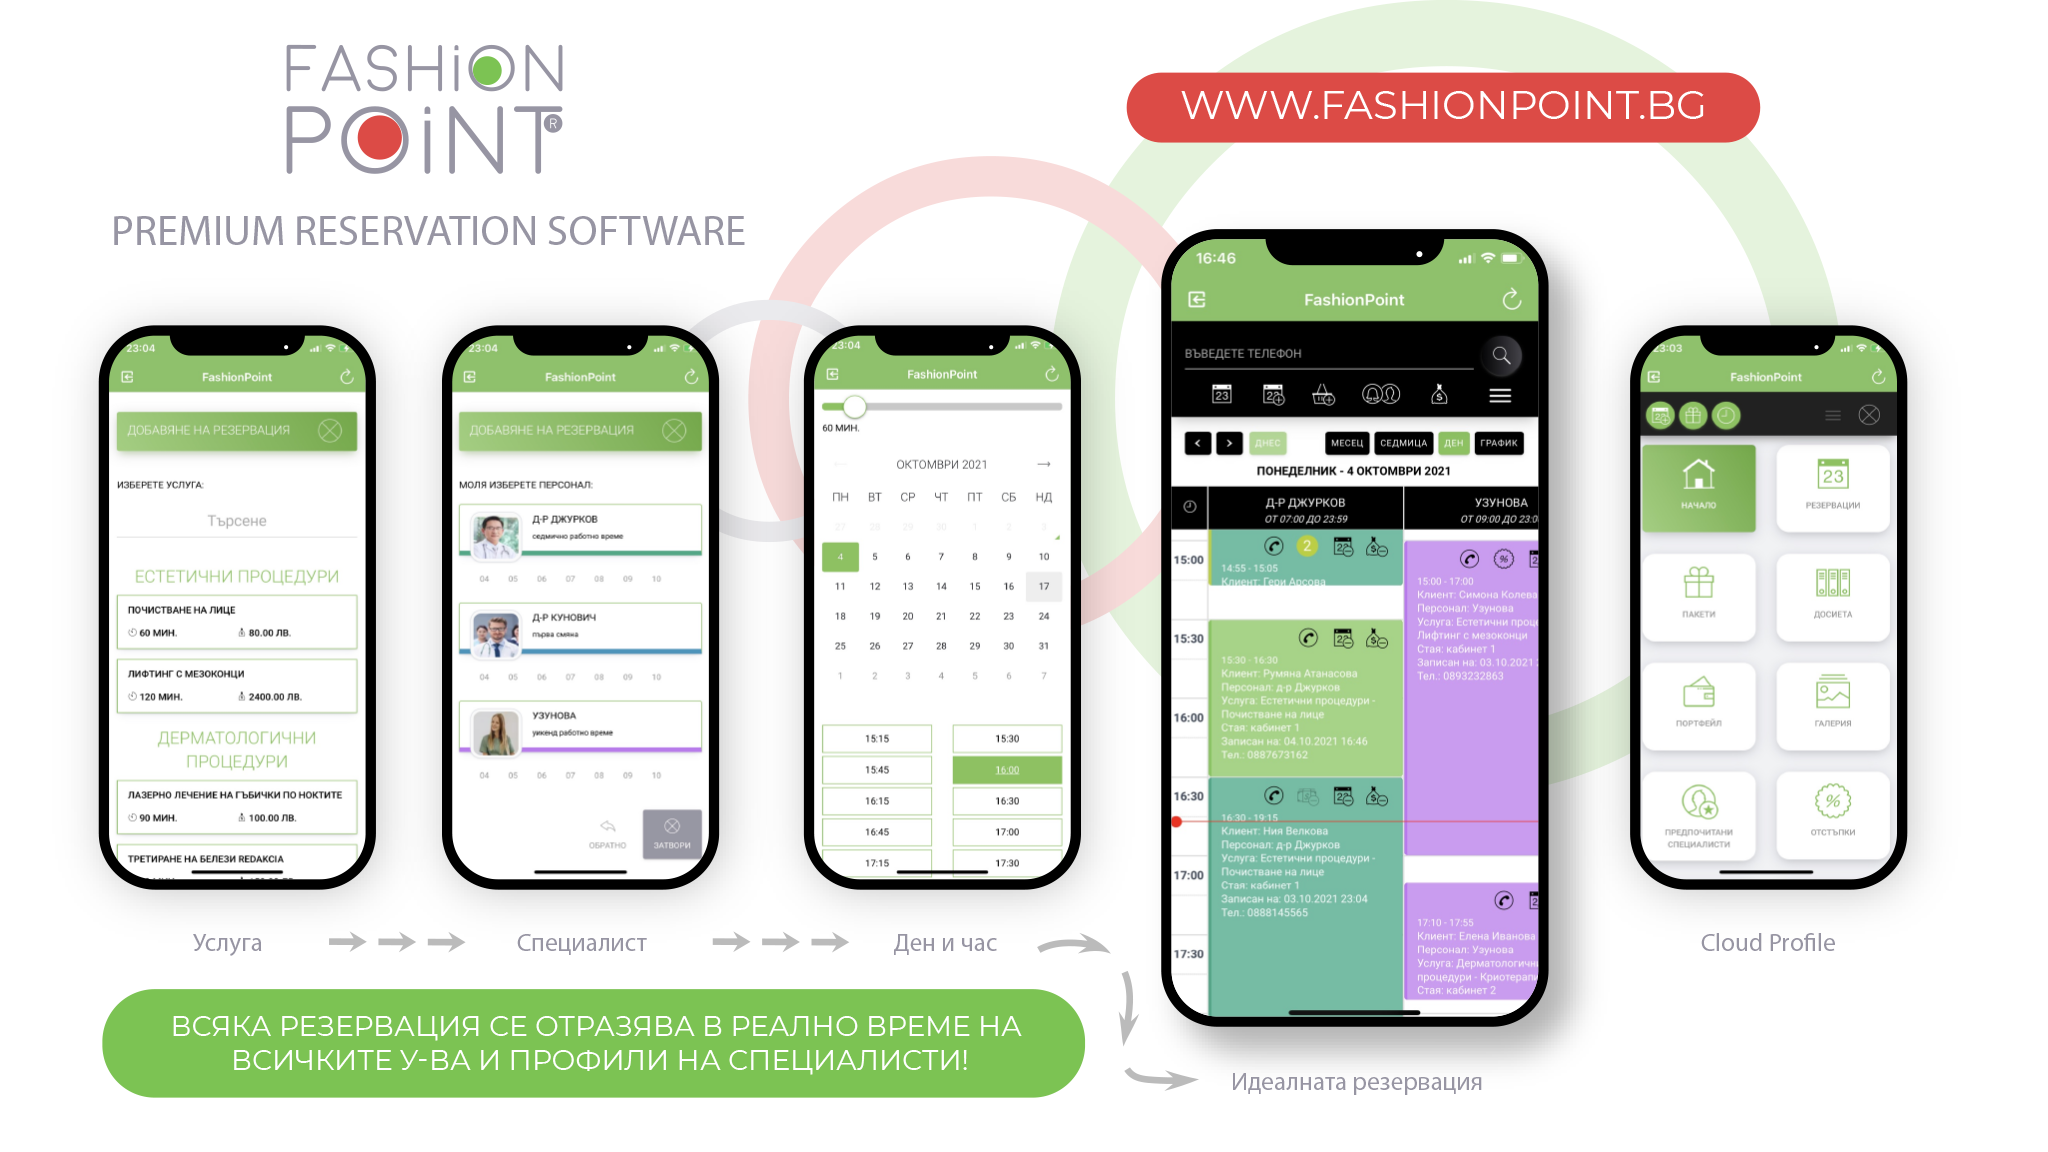 Software for aesthetic clinics and laser centers - CRM FASHION POINT